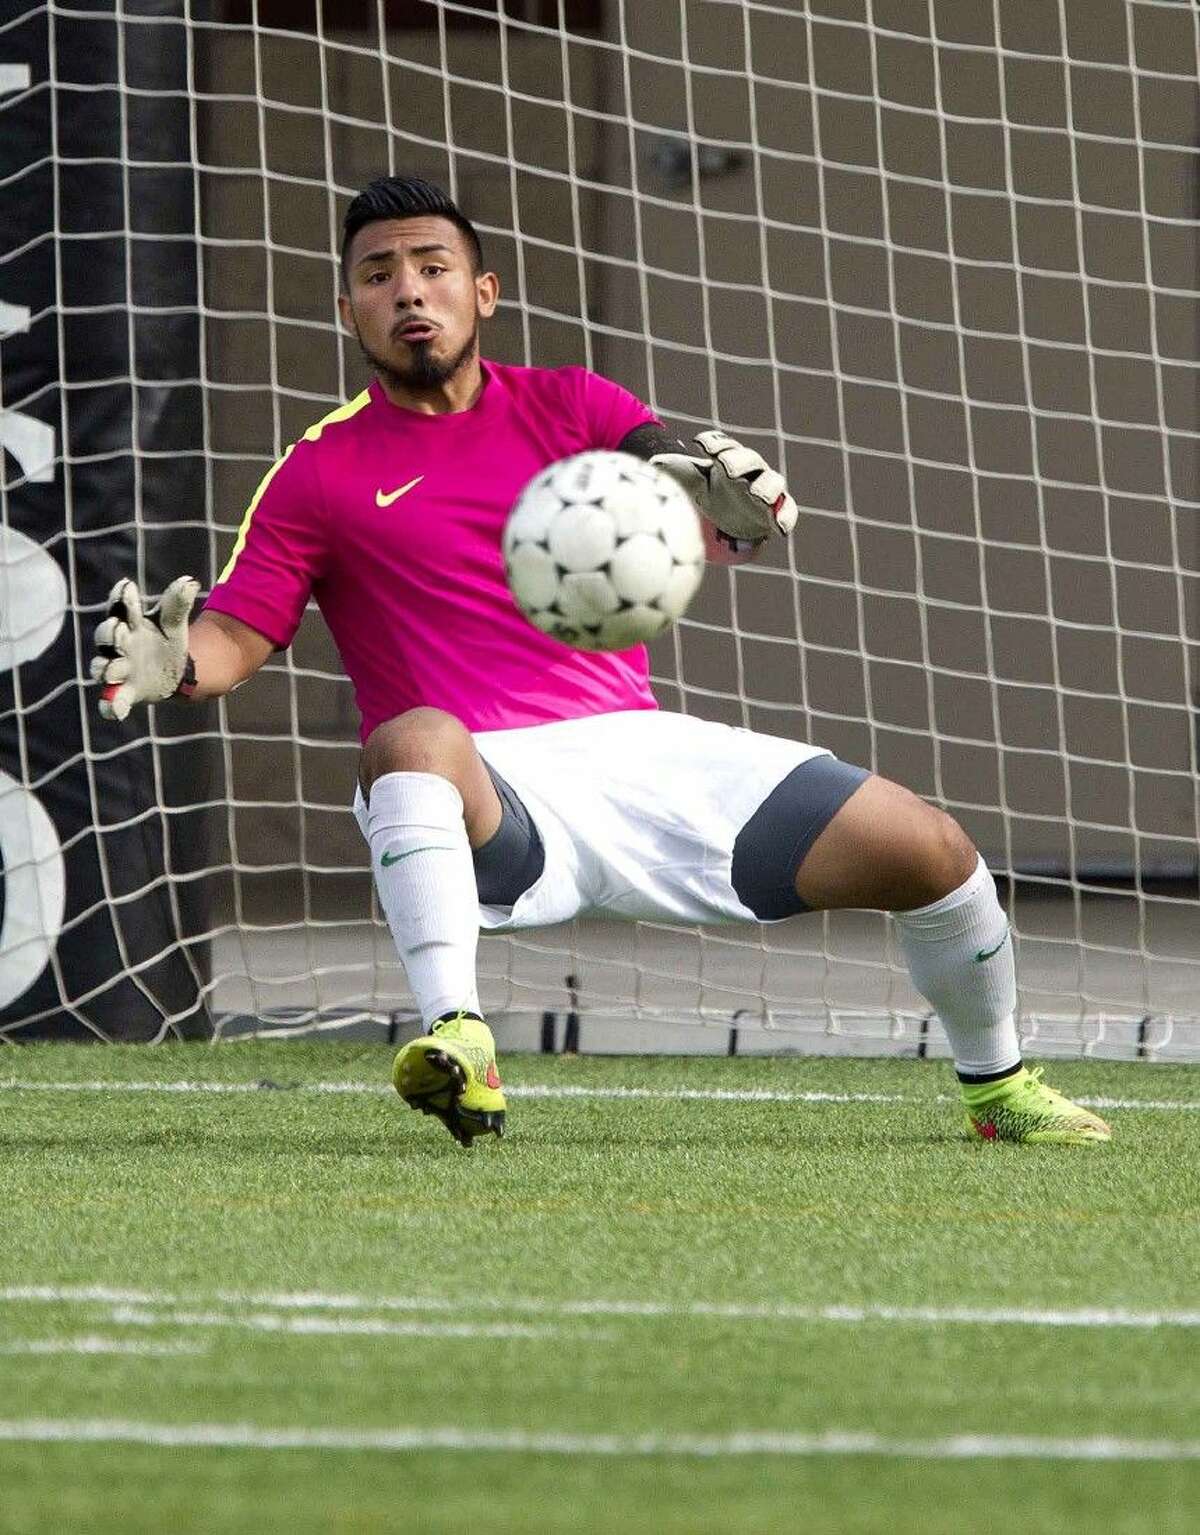 Conroe goalie Juan Ochoa stops a shot during a Region II-6A bi-district playoff game Thursday. Klein Forest defeated Conroe 3-0. To view or purchase this photo and others like it, visit HCNpics.com.